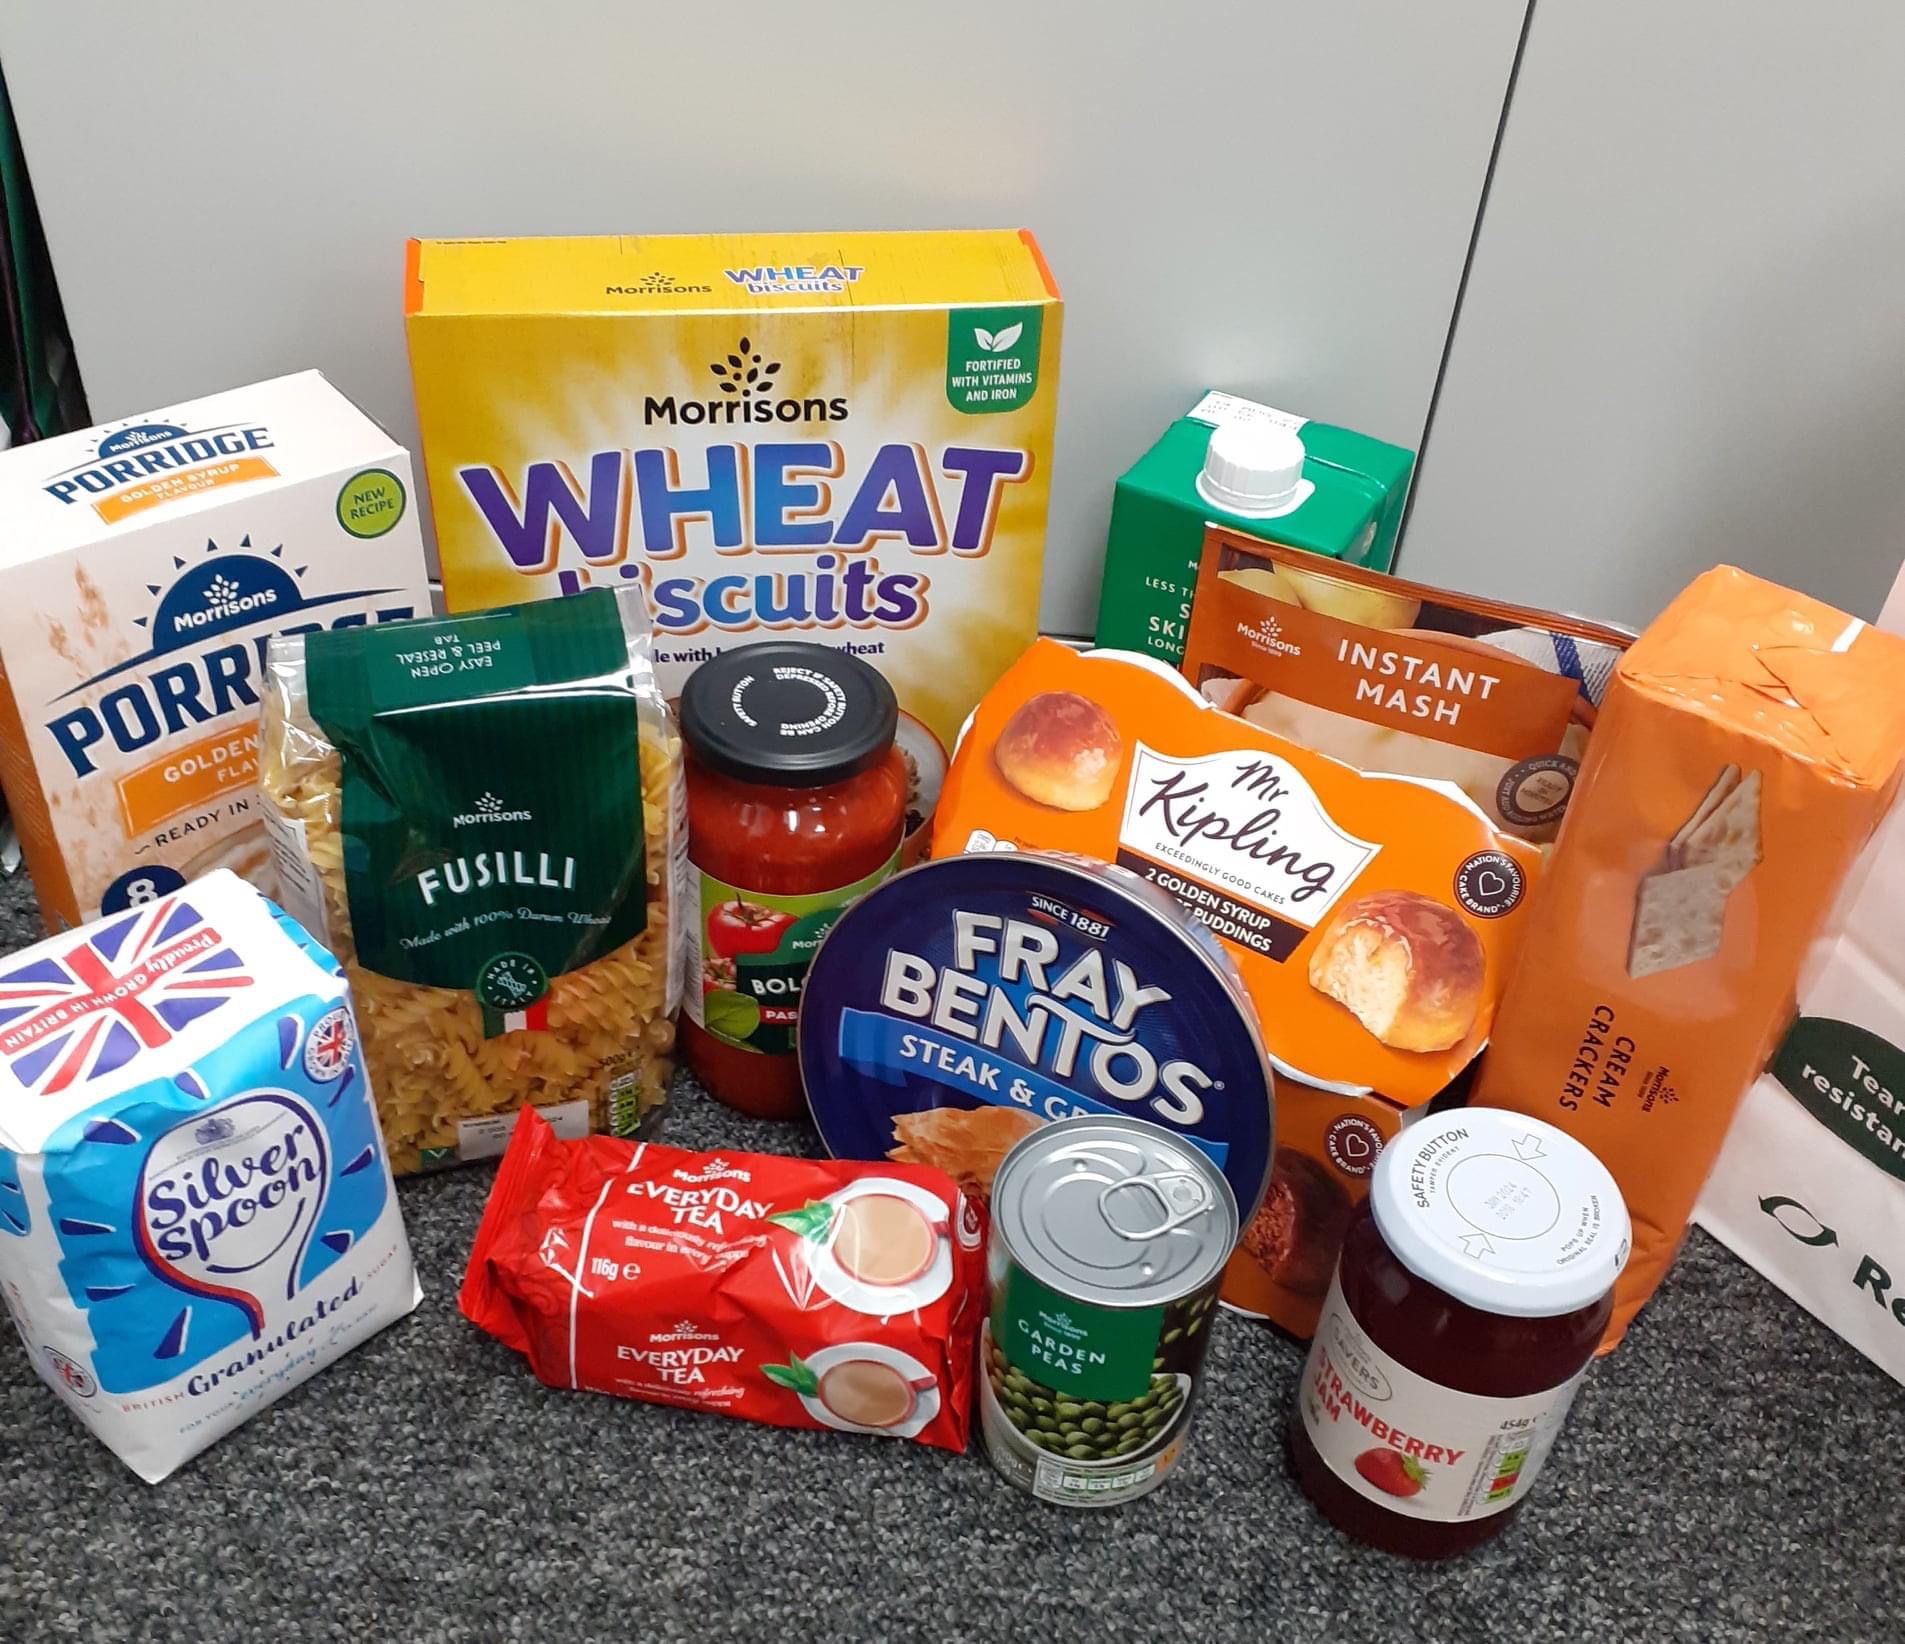 NEWS | Morrisons team up with Hereford Food Bank with shoppers able to purchase a £15 bag of food to donate to the food bank